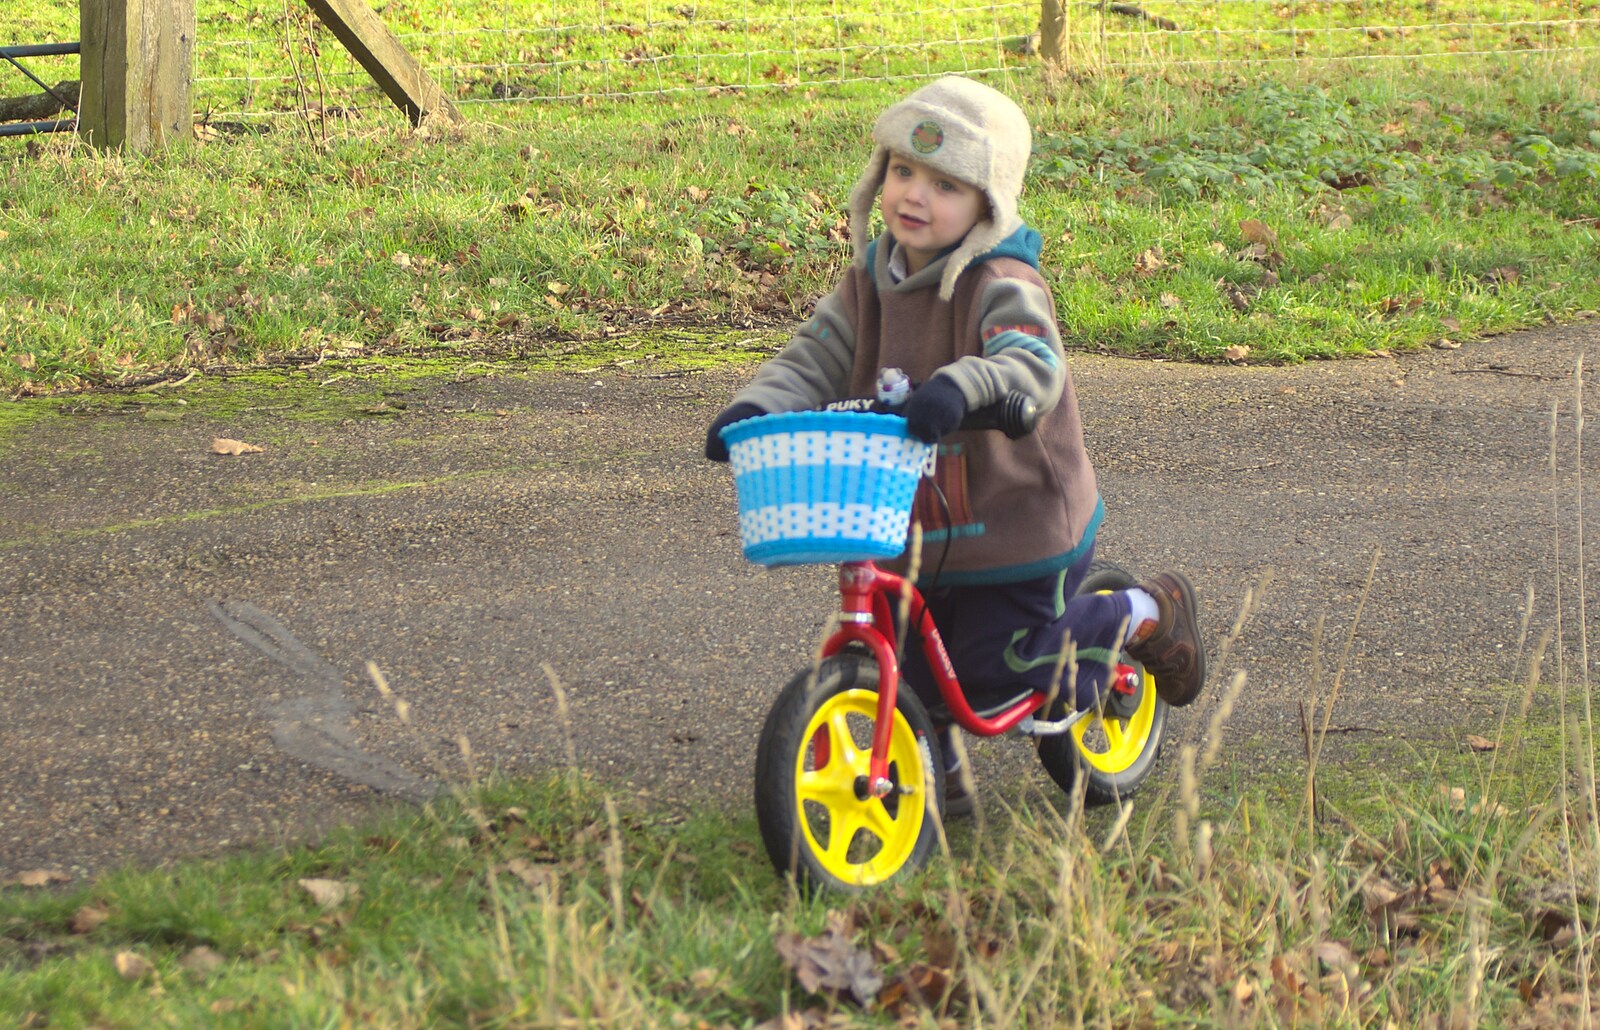 Fred on his little balance bike from A Boxing Day Walk, and a Trip to the Beach, Thornham and Southwold, Suffolk - 26th December 2011